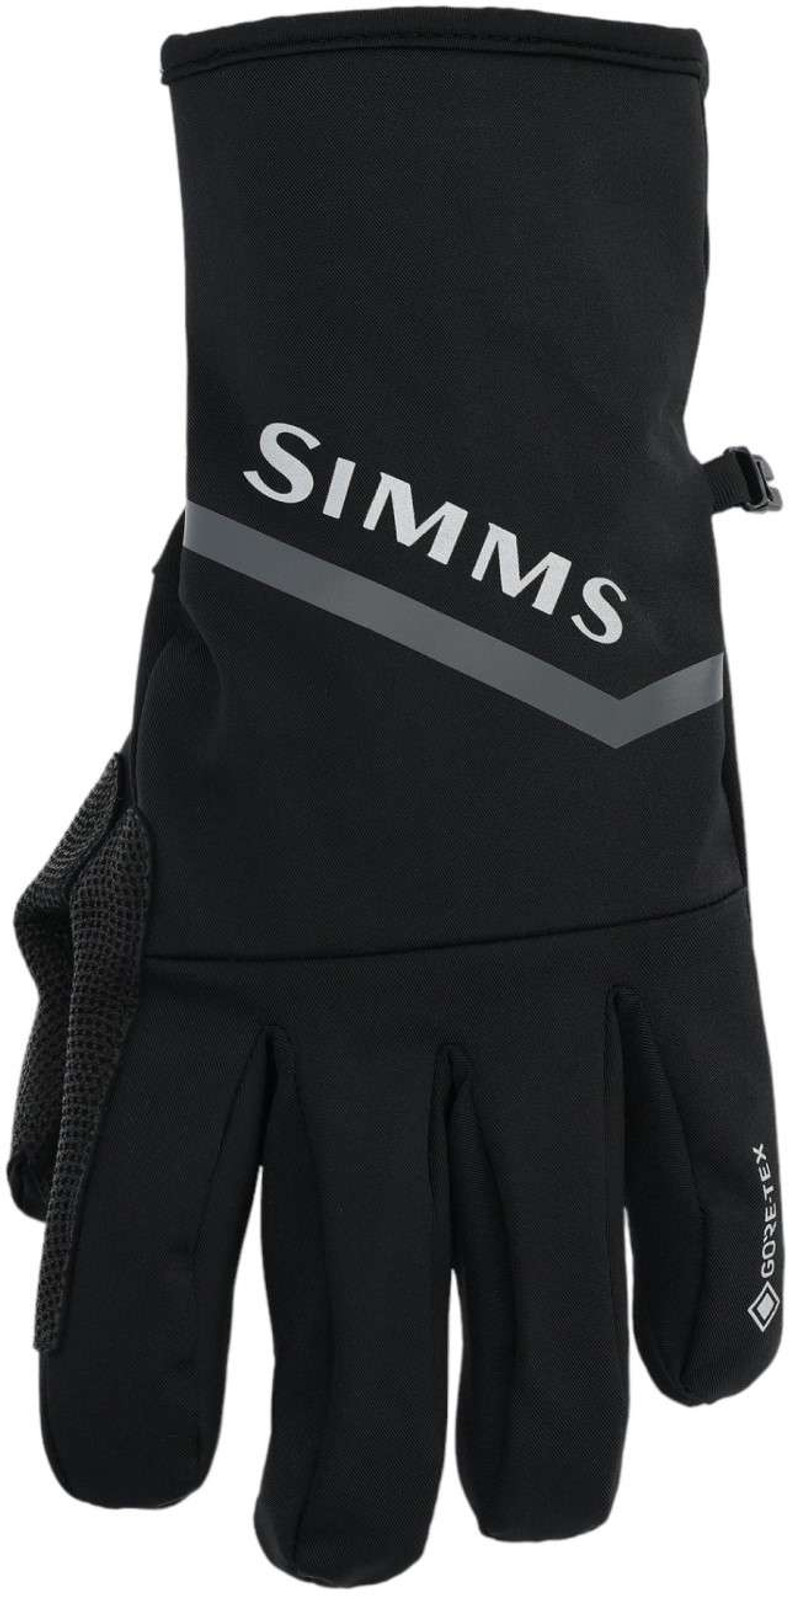 https://cdn11.bigcommerce.com/s-palssl390t/images/stencil/800w/products/152983/259857/simms-prodry-gore-tex-fishing-glove-and-liner__55641.1697462529.1280.1280.jpg